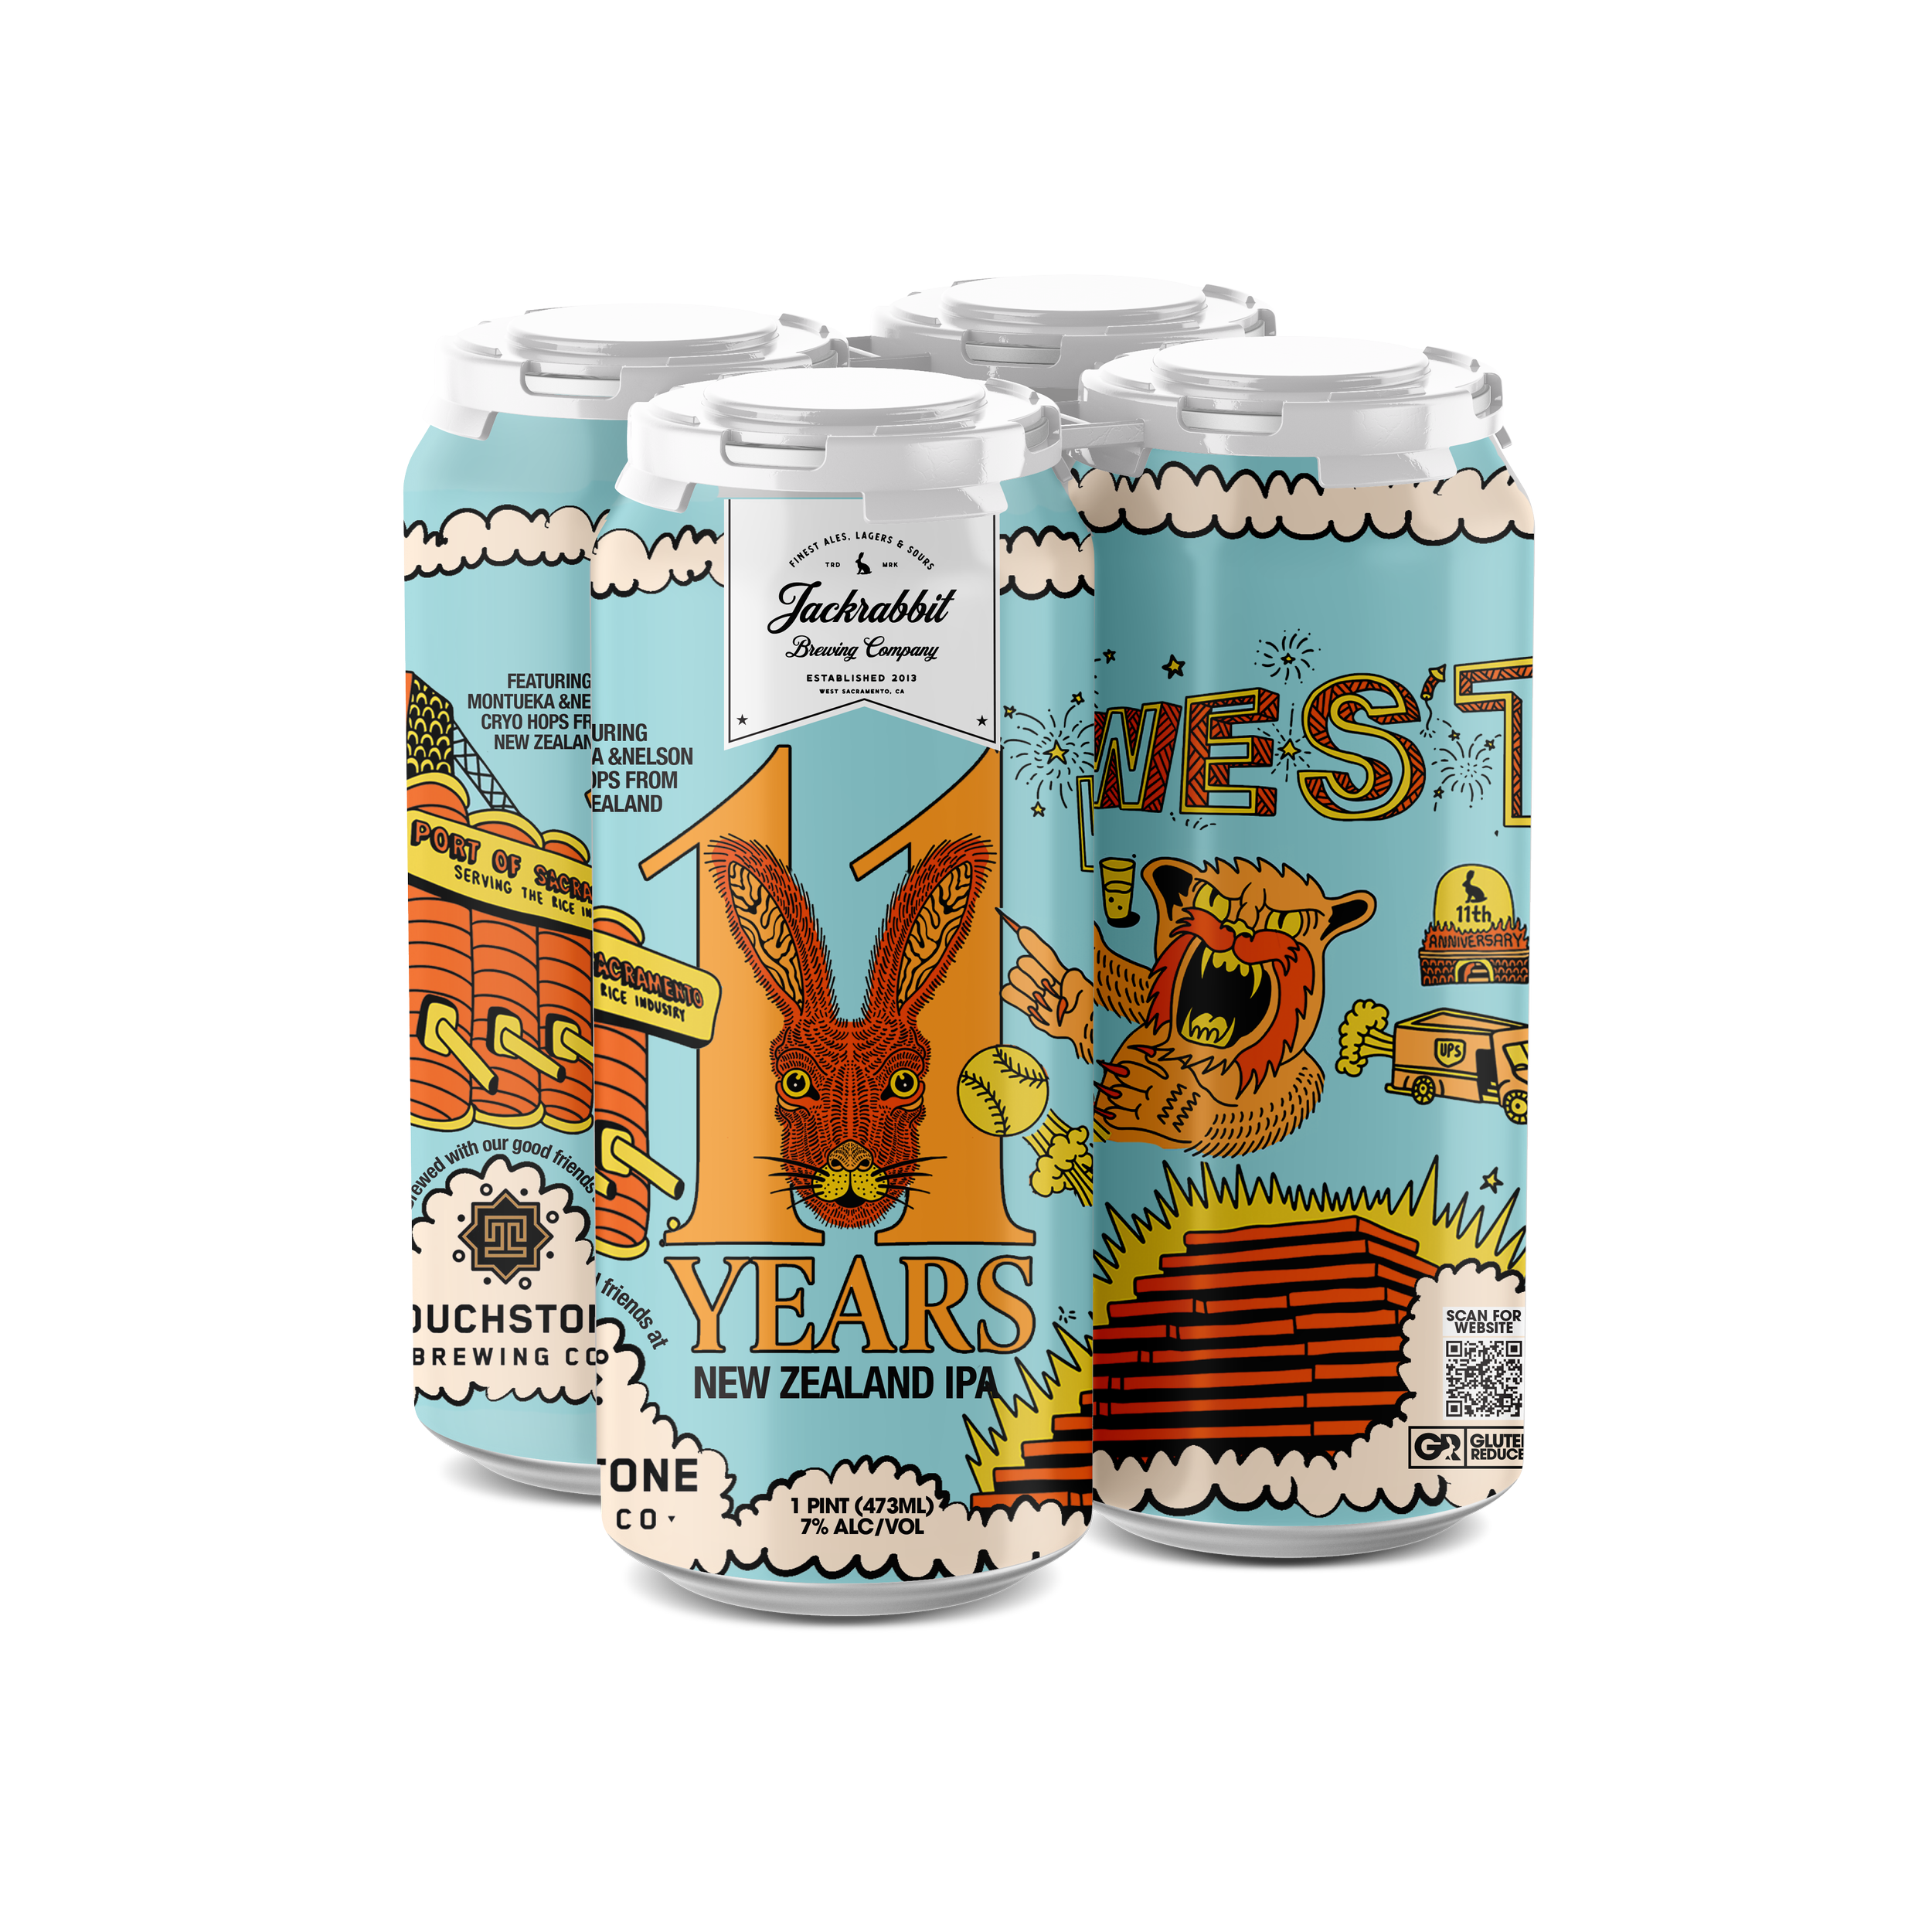 4 Can 11 Years New Zealand IPA.png